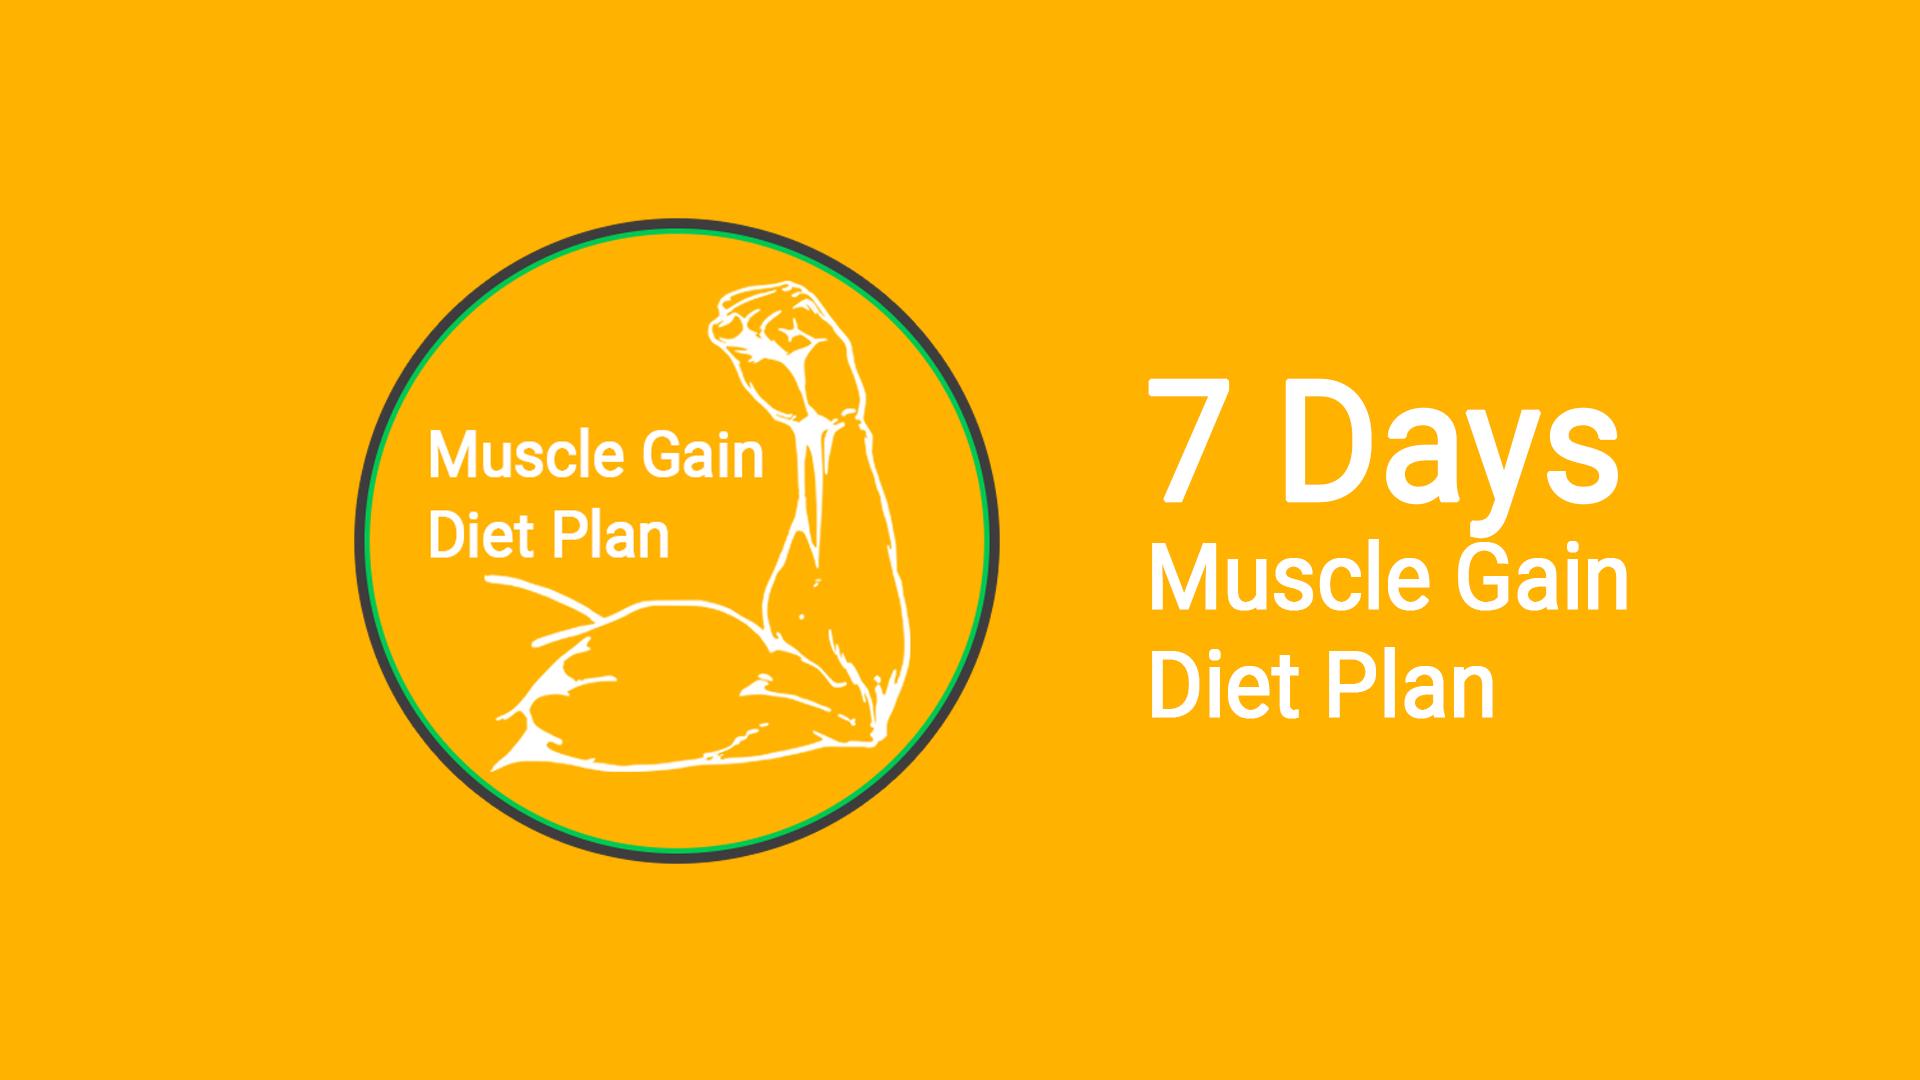 Muscle Gain Diet Plan Bodybuilding Diet For Android Apk Download Images, Photos, Reviews